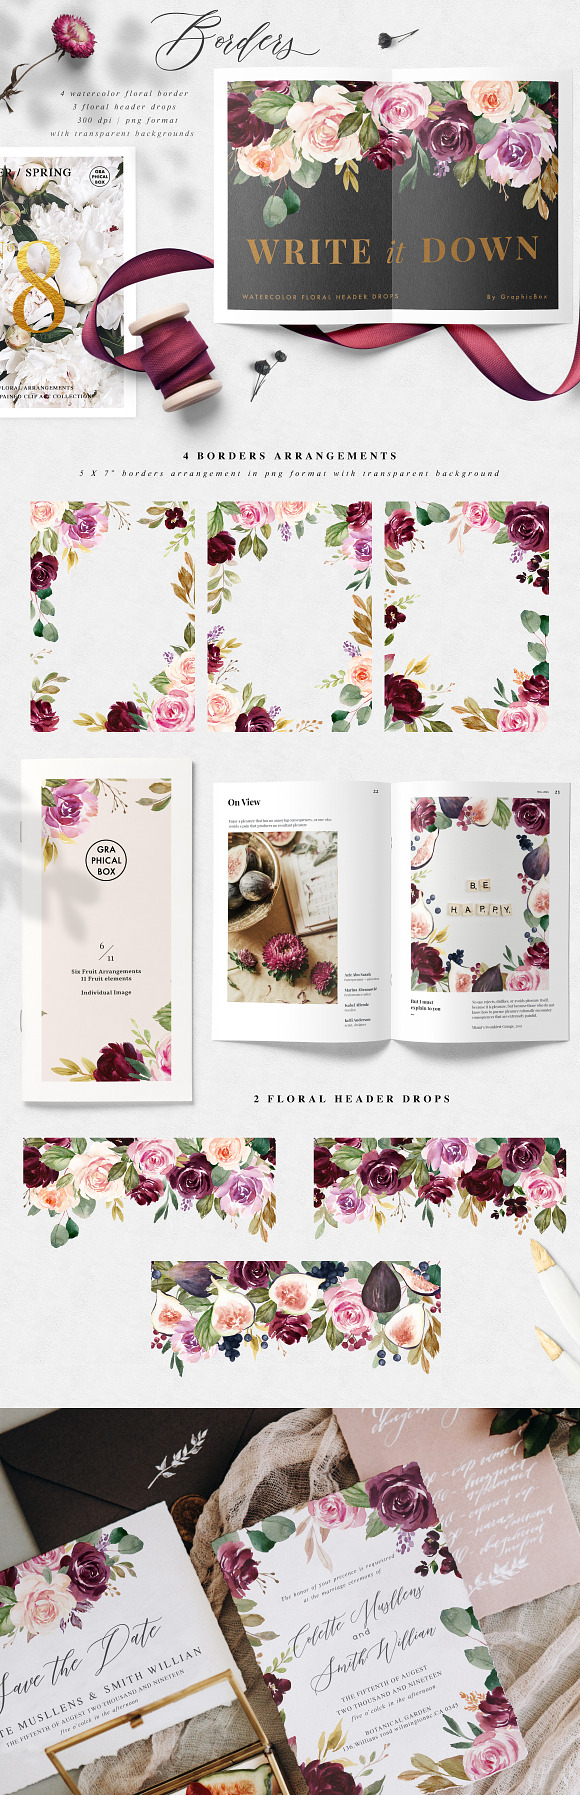 Moody&Rustic-Watercolor Graphic Set in Illustrations - product preview 5